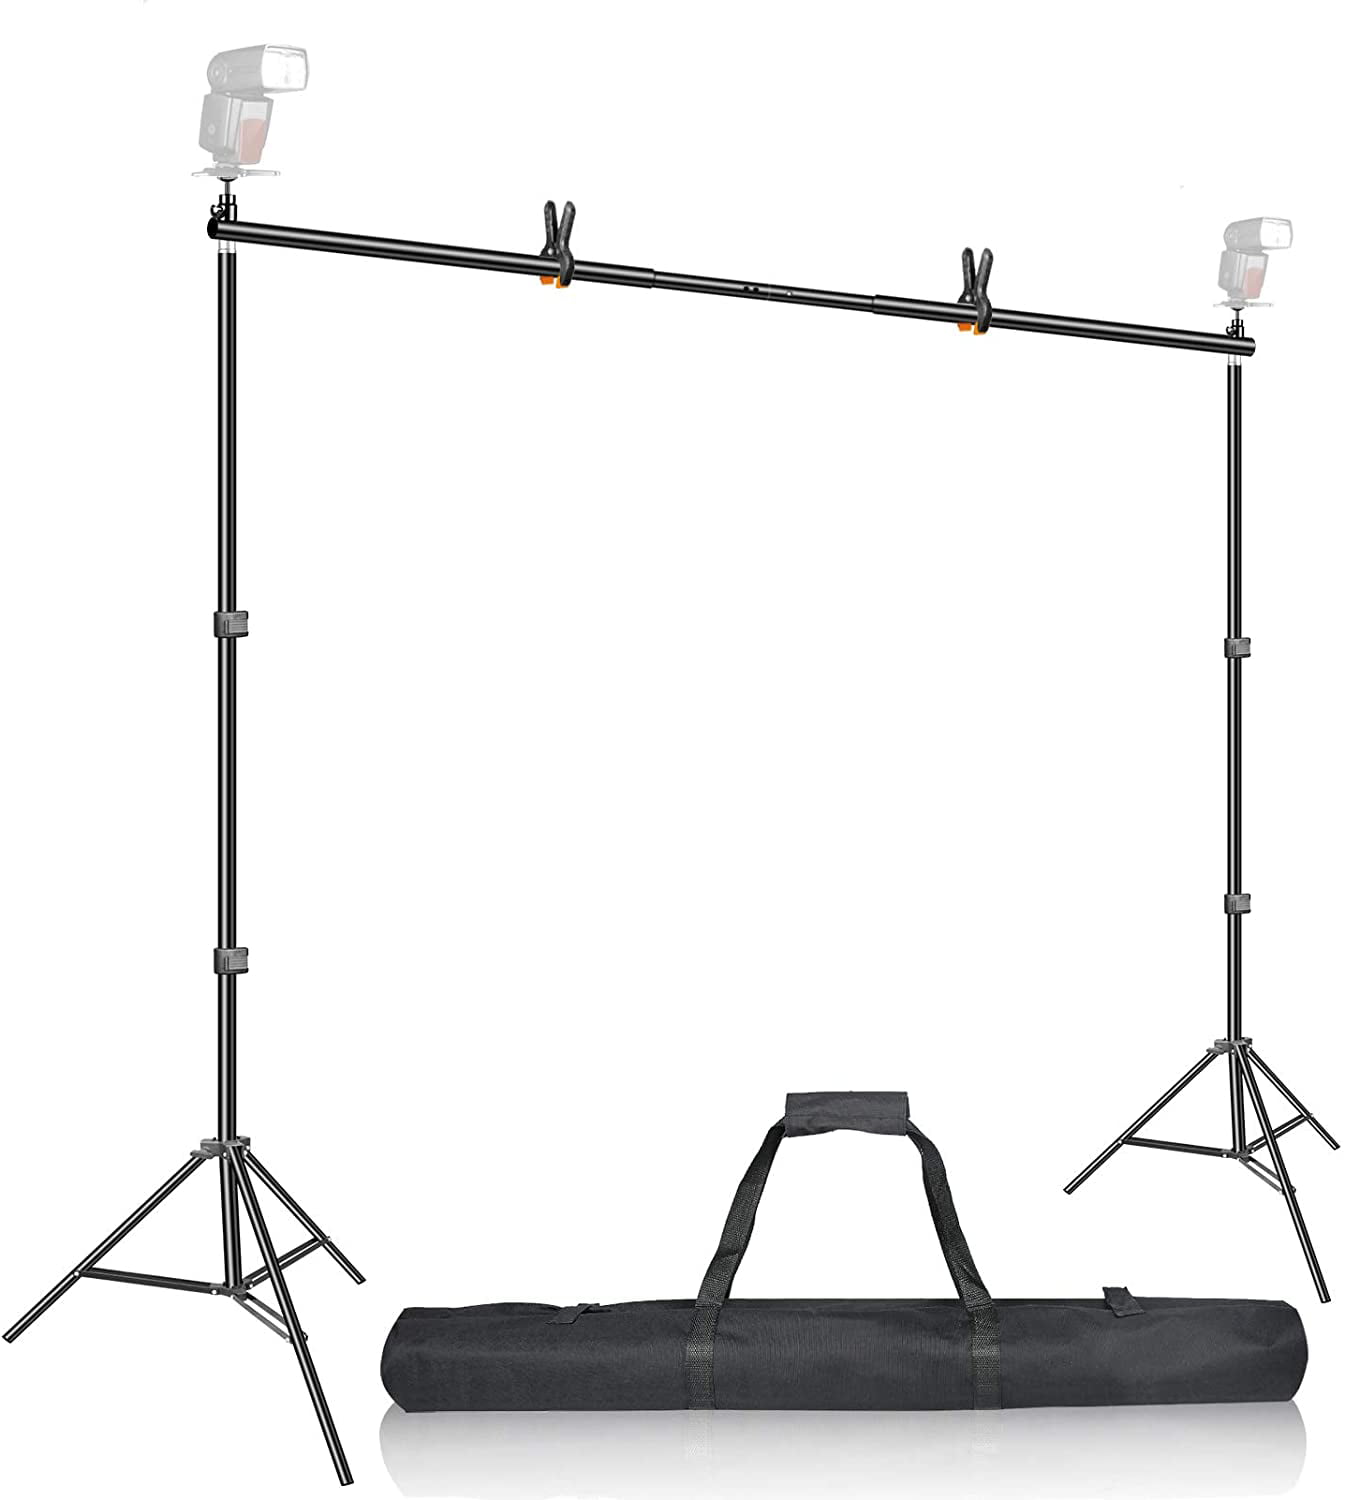 Backdrop Stand, Emart 7x10ft Photo Video Studio Muslin Background Stand  Backdrop Support System Kit with Mini Ball Head, Photography Studio -  